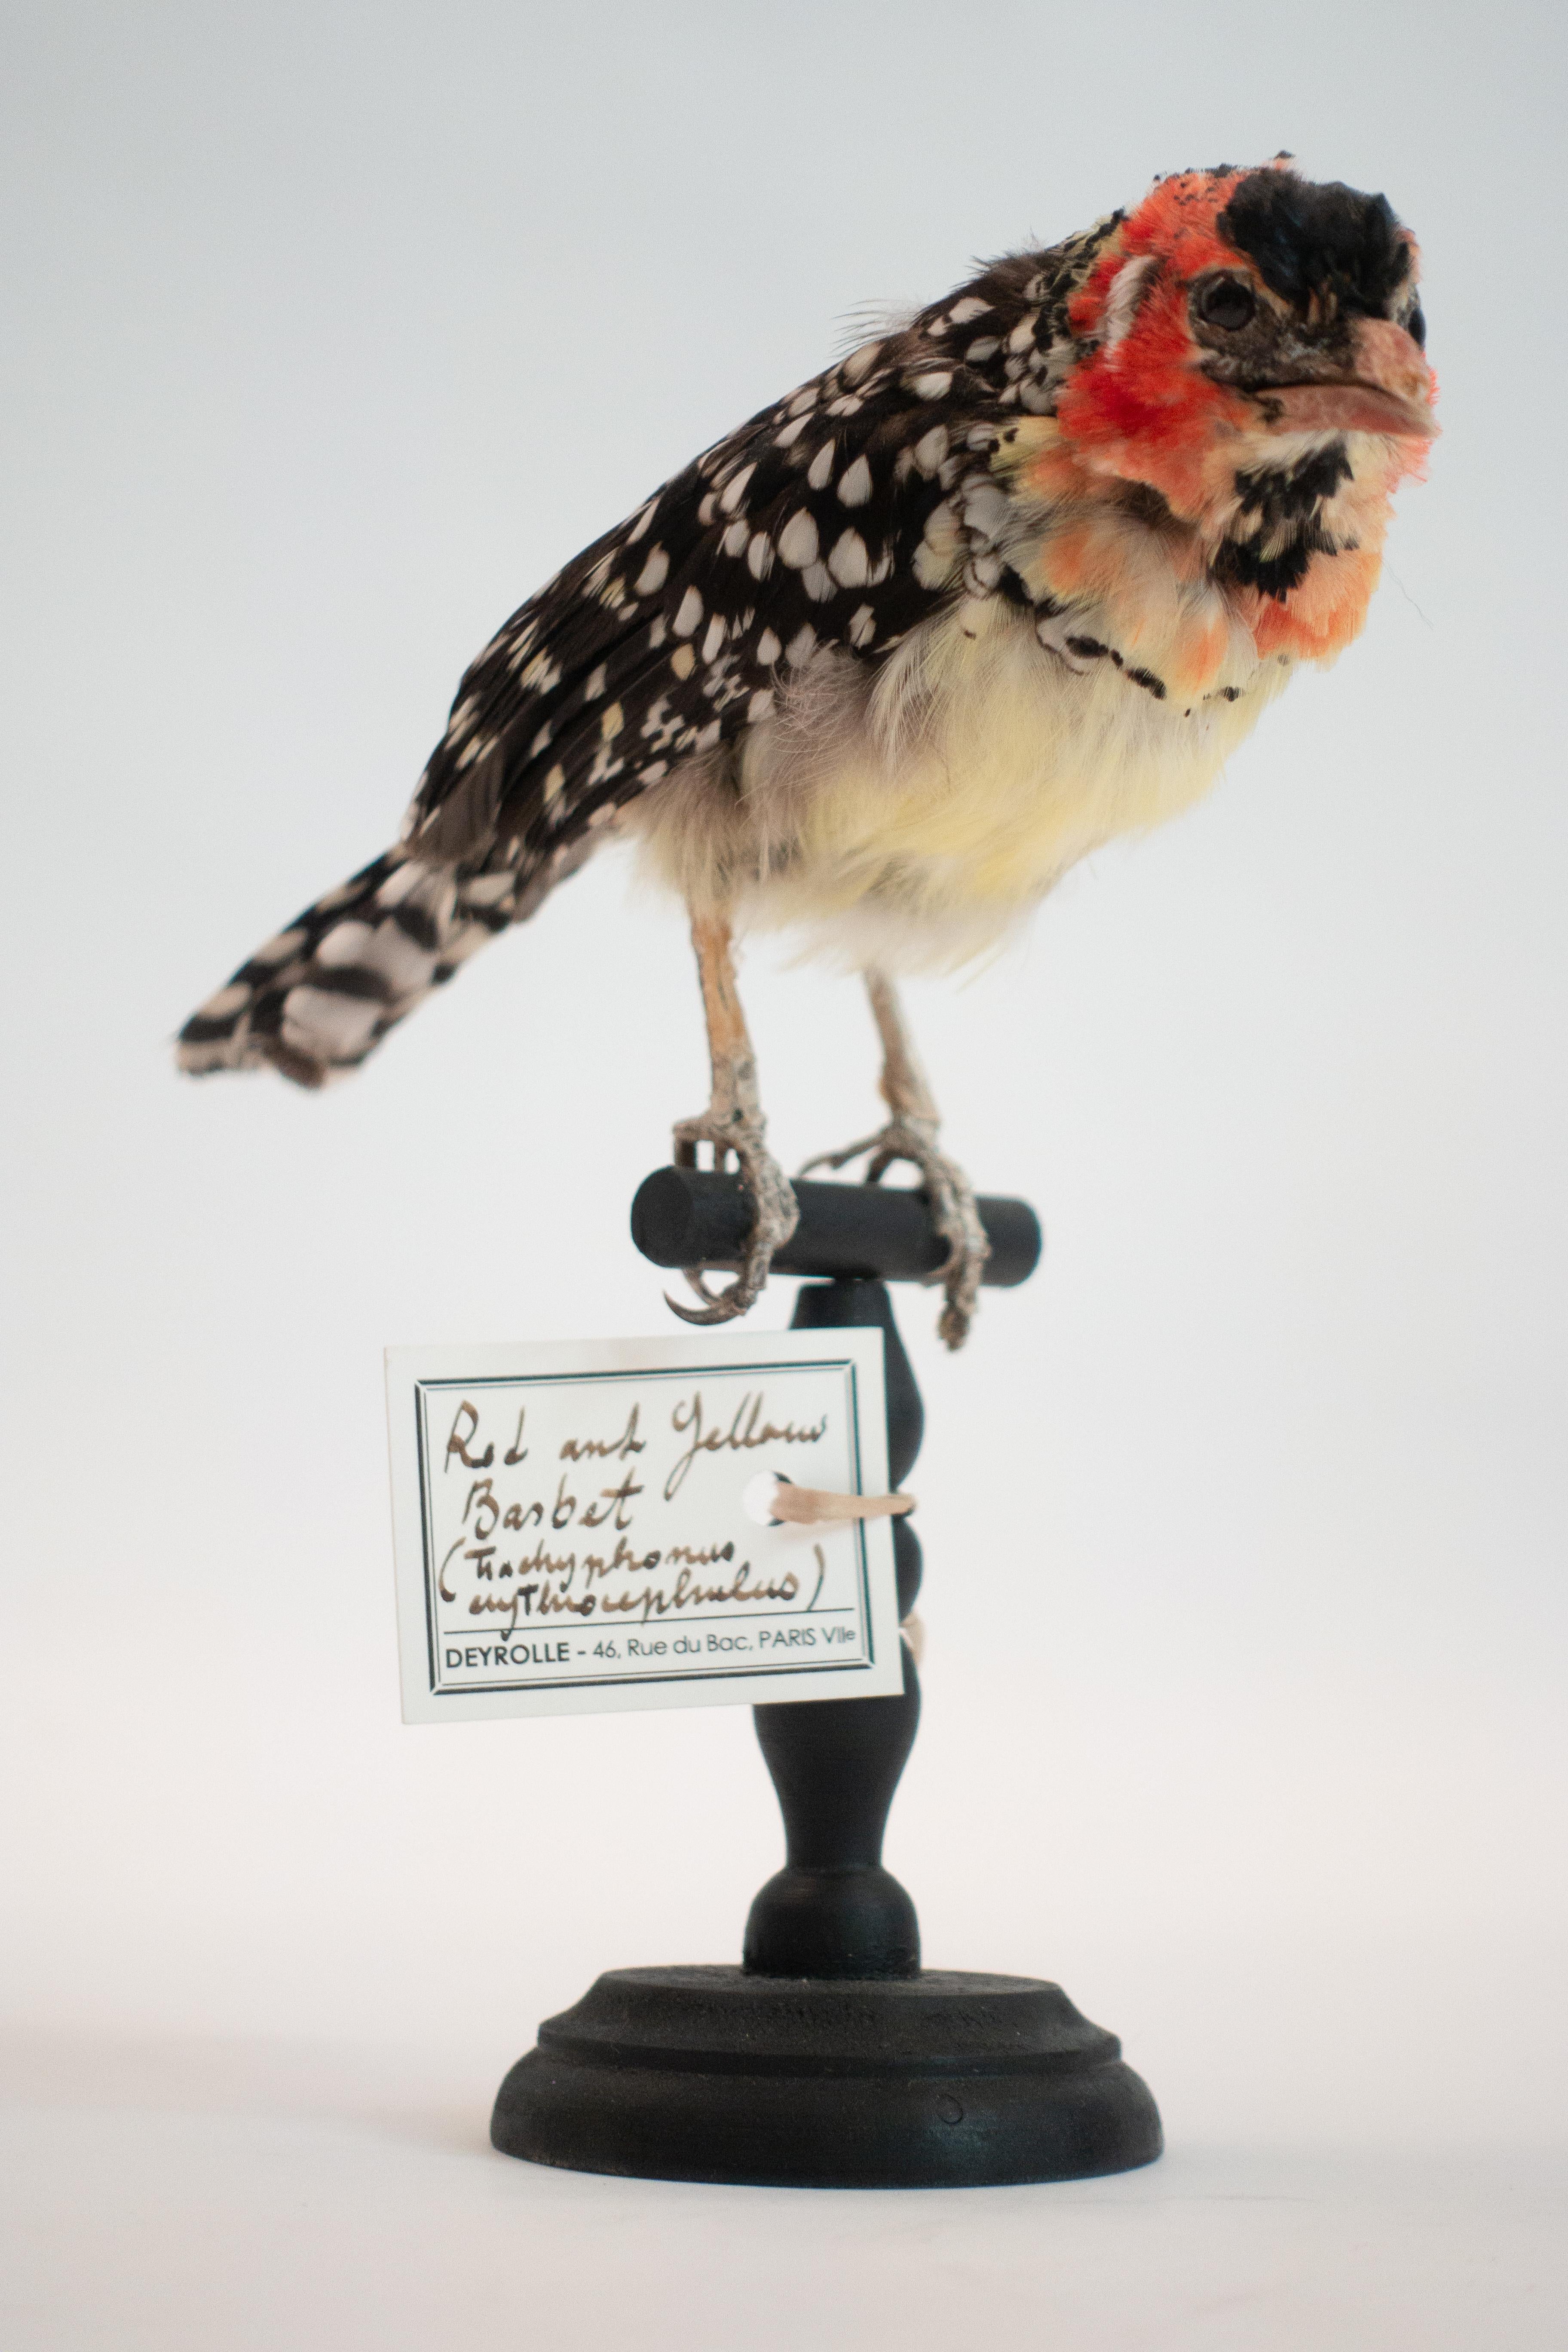 Small and charming in size, this red and yellow Barbet will brighten your day. Add it to your collection or place it on a bookshelf in your library, even your bedside table, it's sure to put a smile on your face. Originally from Deyrolle in Paris.